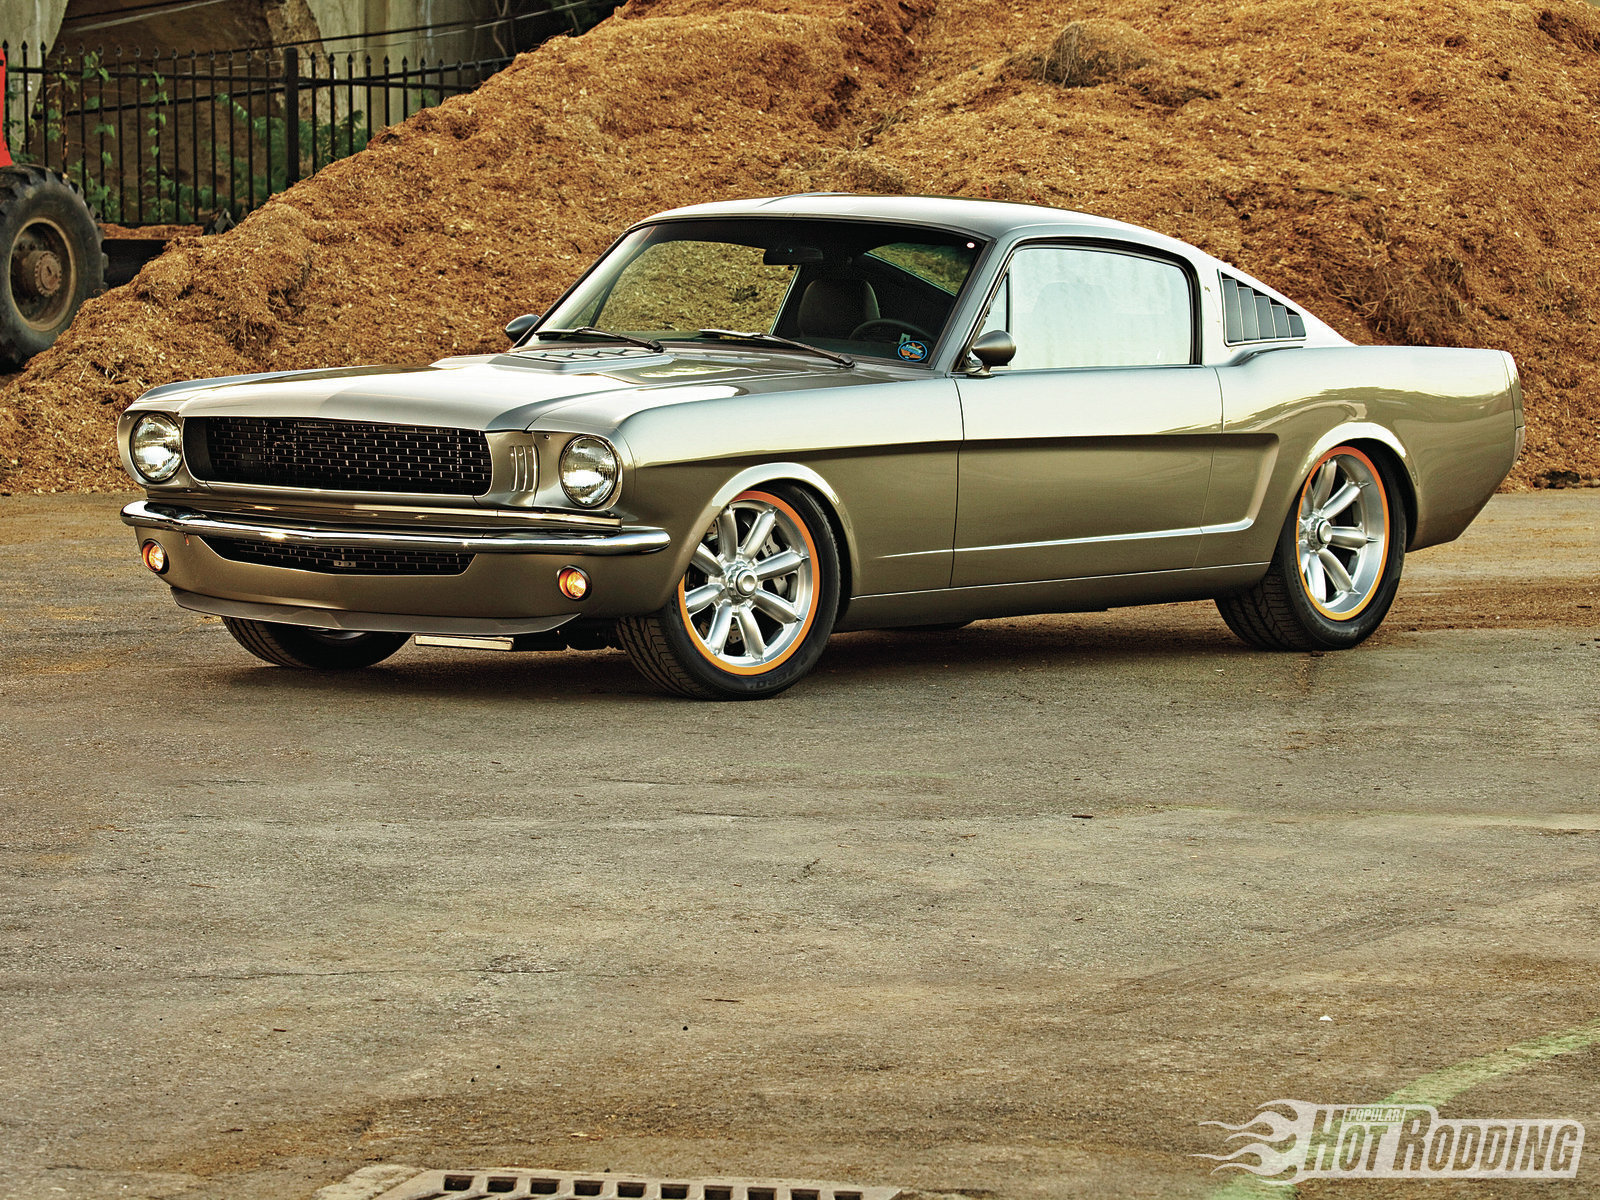 vehicles, ford mustang fastback, classic car, fastback, ford mustang, ford, muscle car